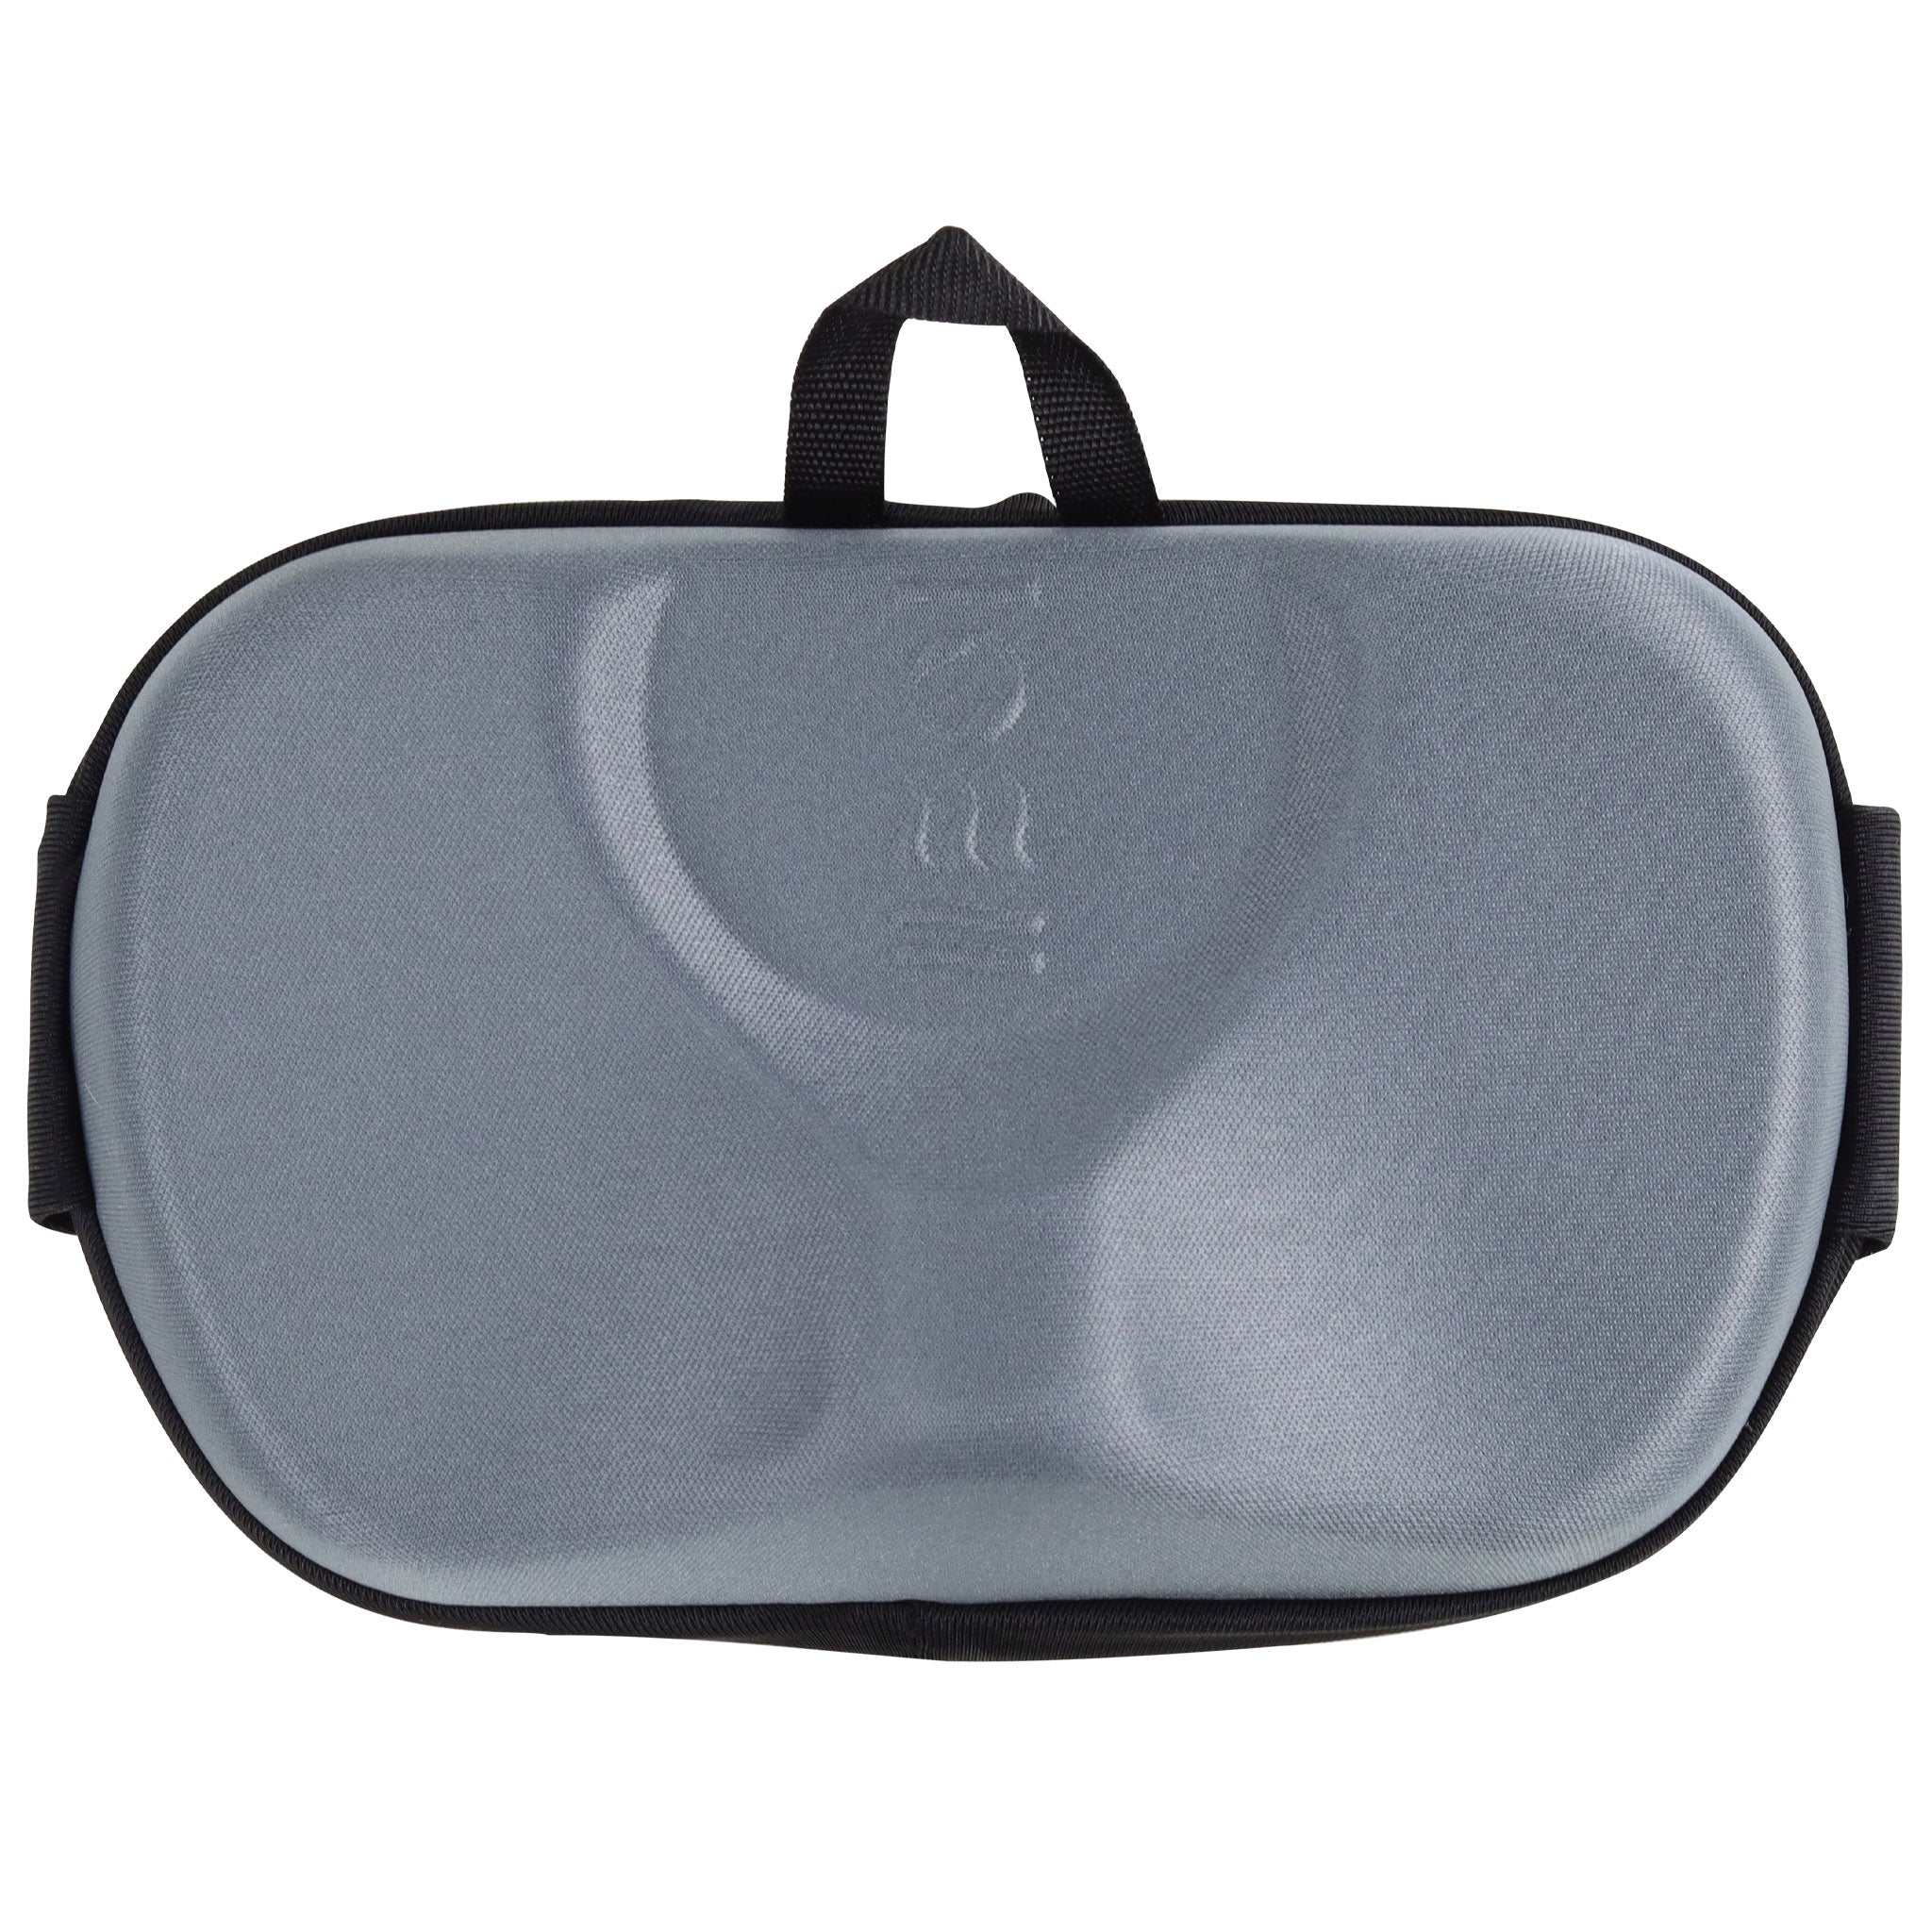 Fourth Element Scout Mask Case